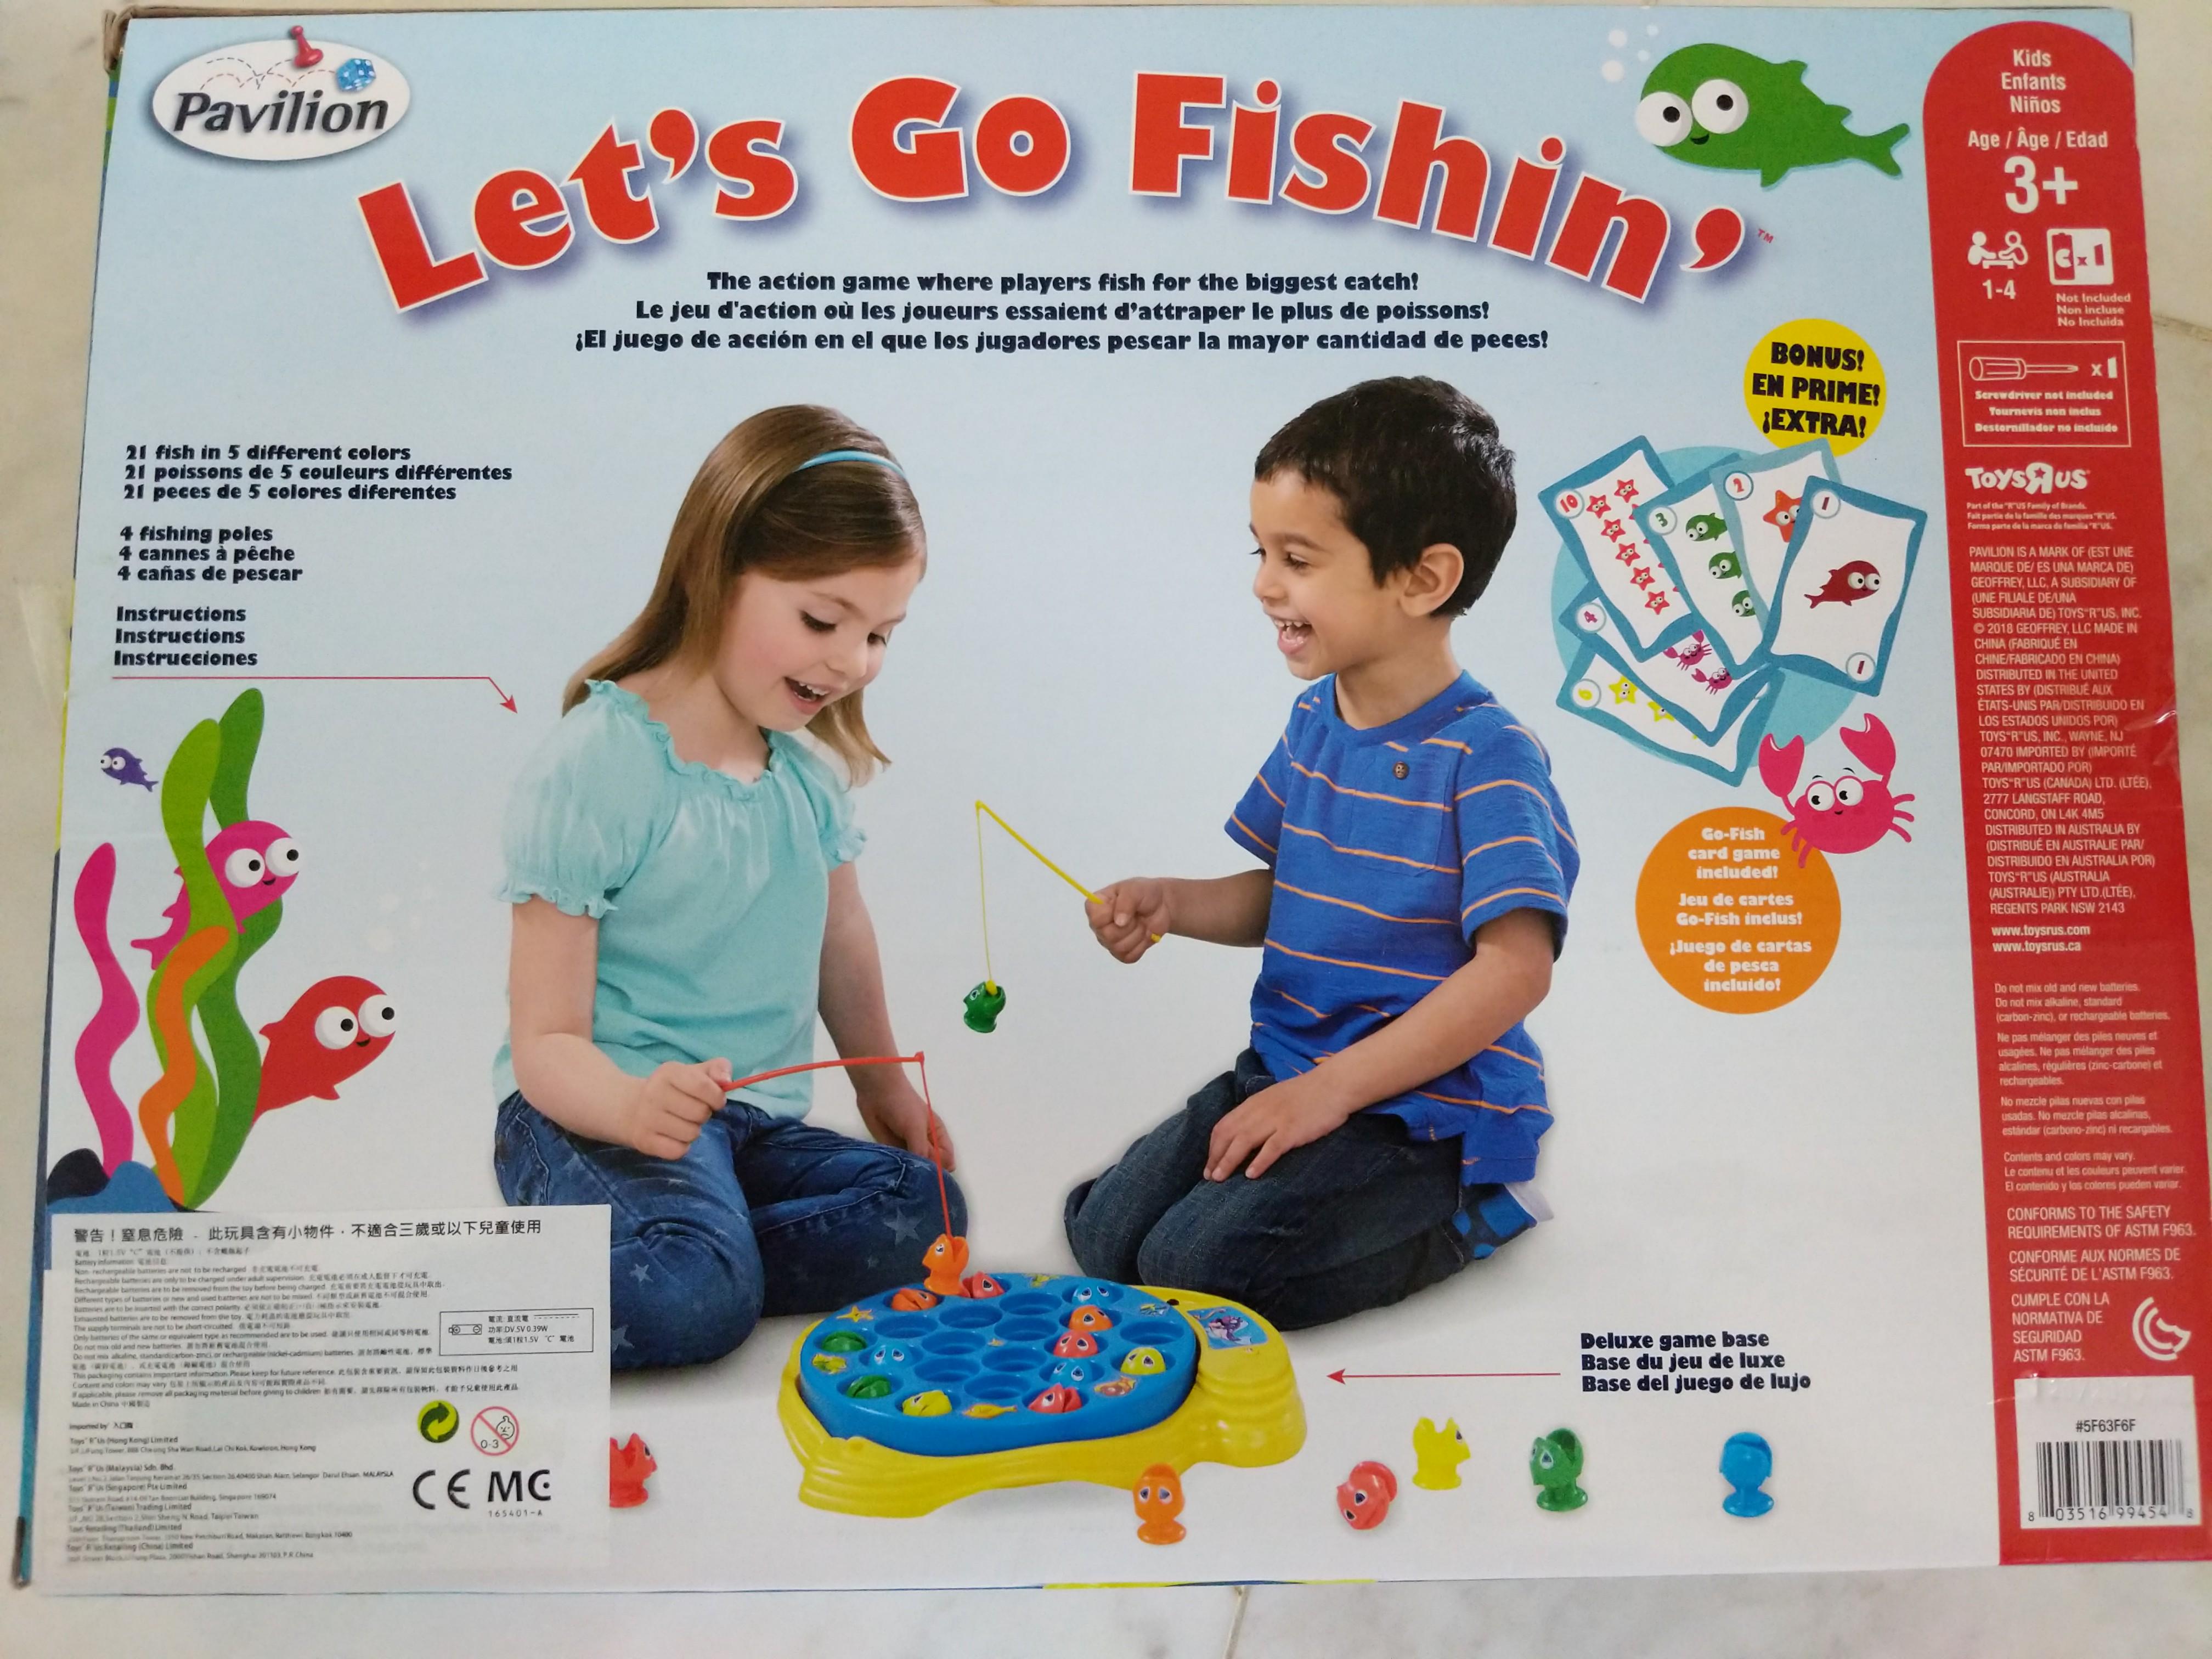 Almost new Toysrus Pavilion Lets Go Fishing Game